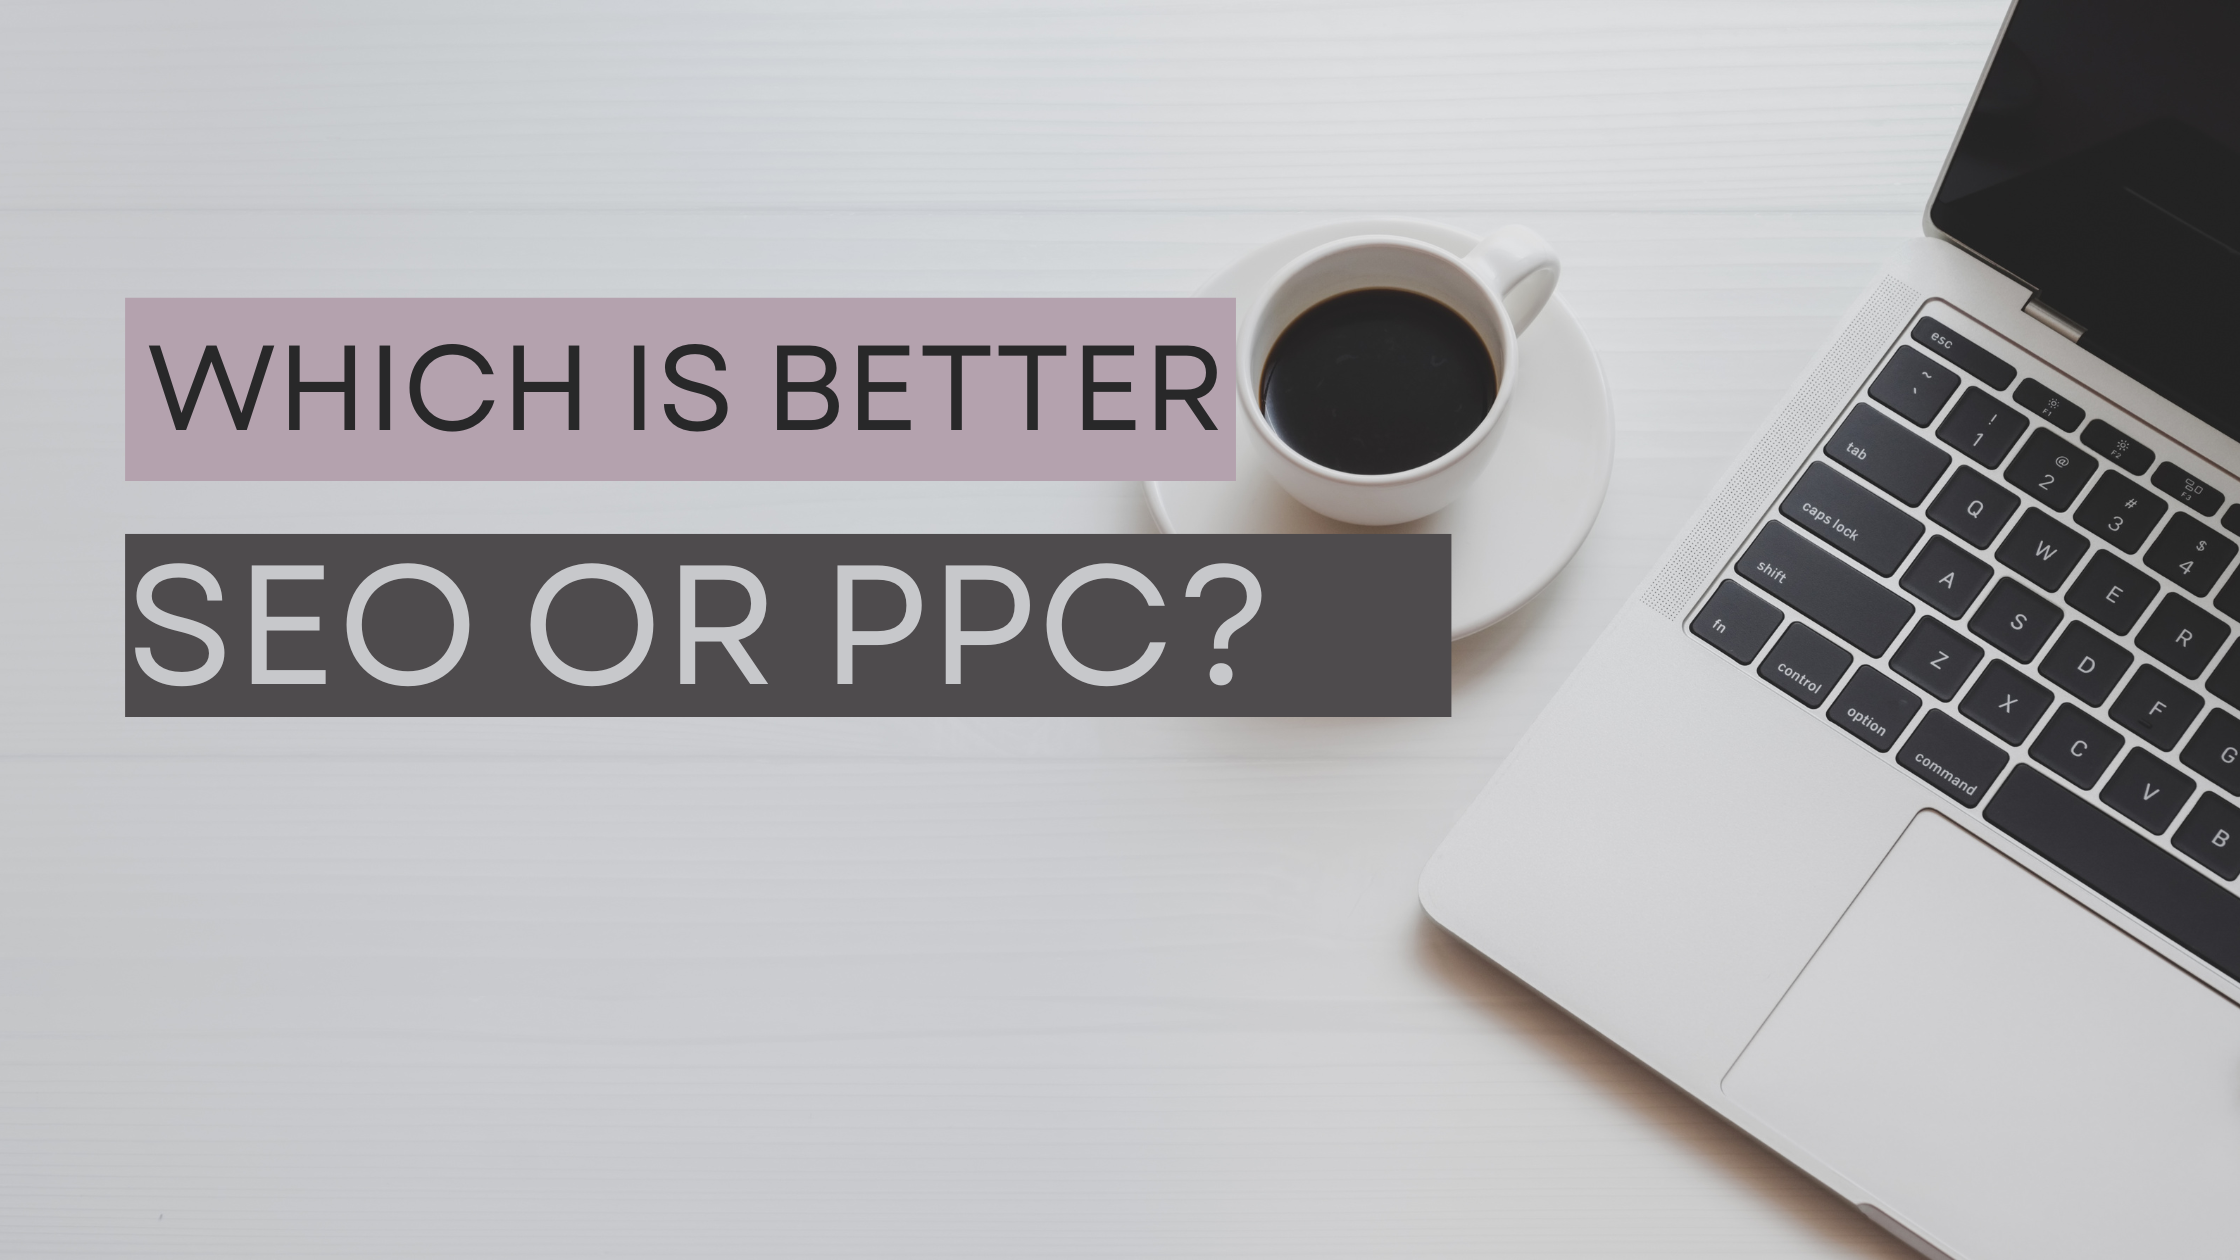 Which is better For Your Online Business- SEO or PPC?